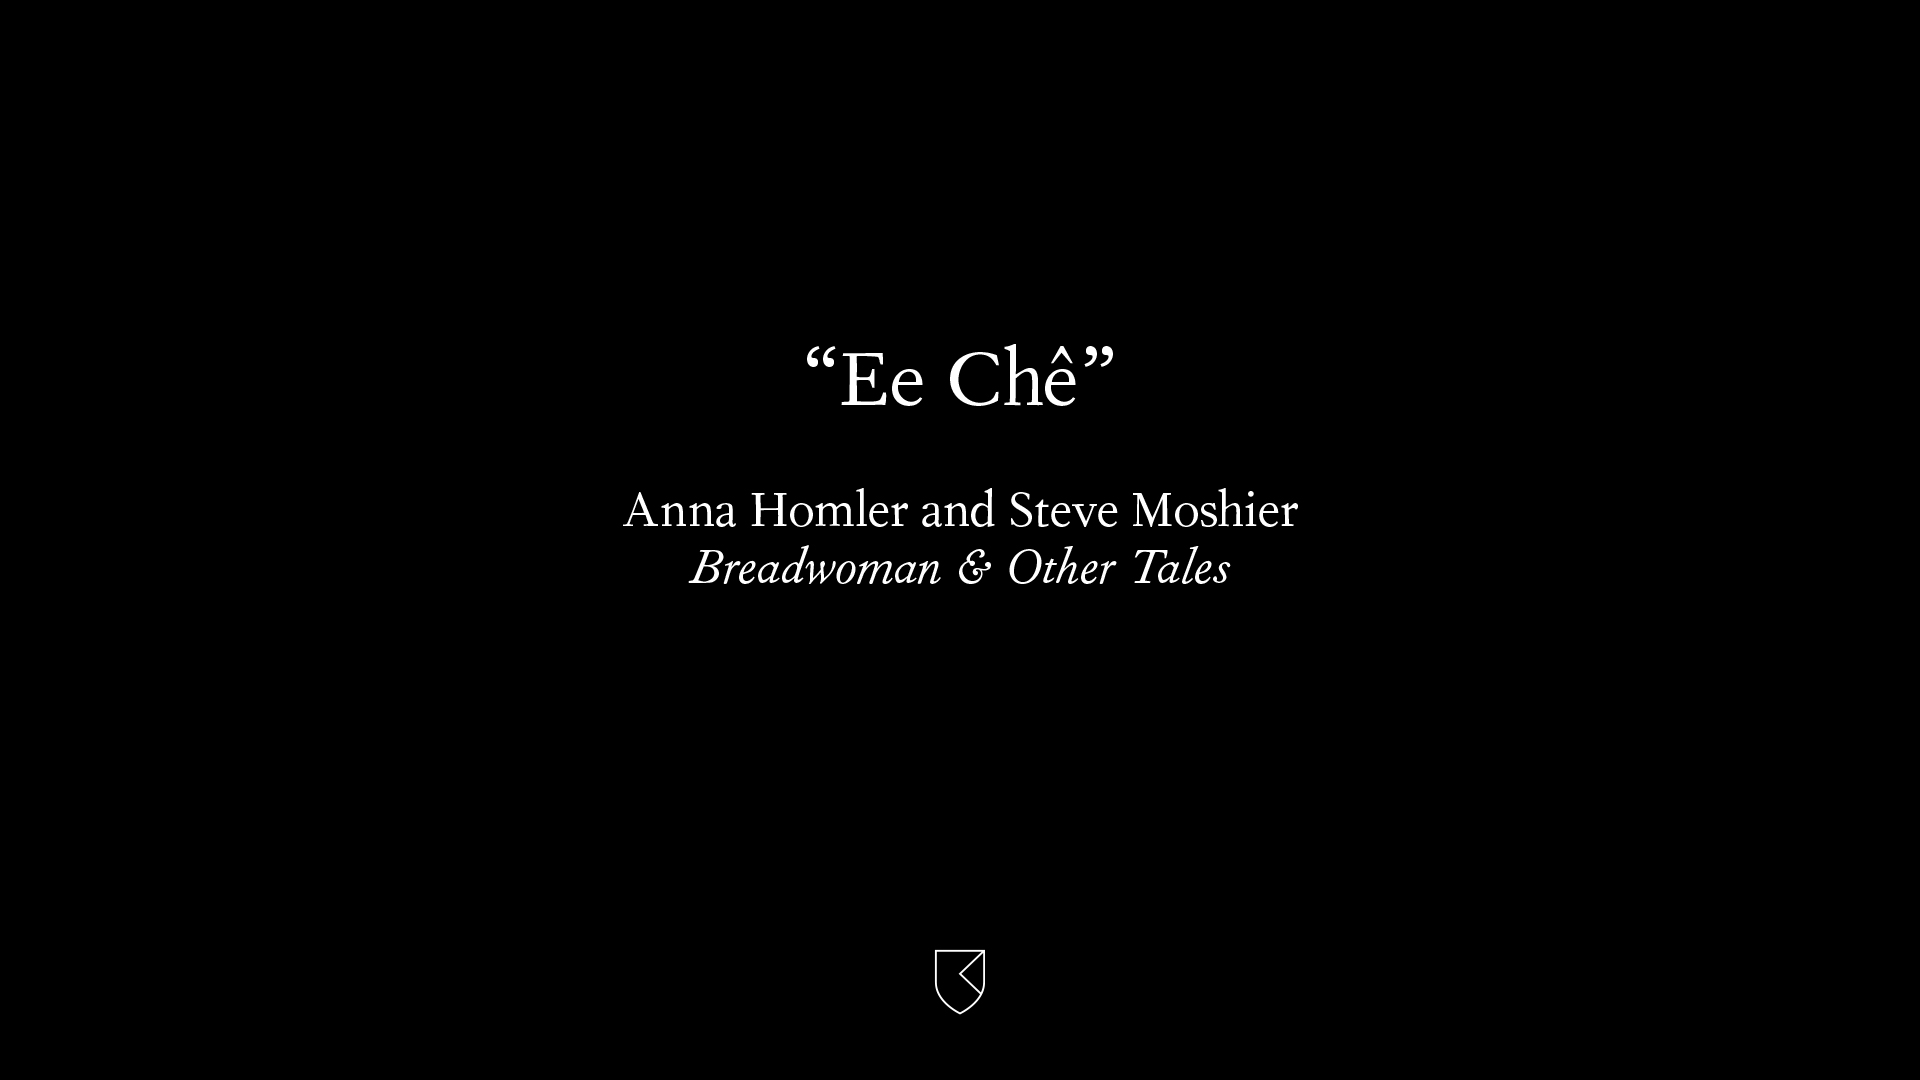 Link to Video for Anna Homler and Steve Moshier – Ee Chê [Official Audio]